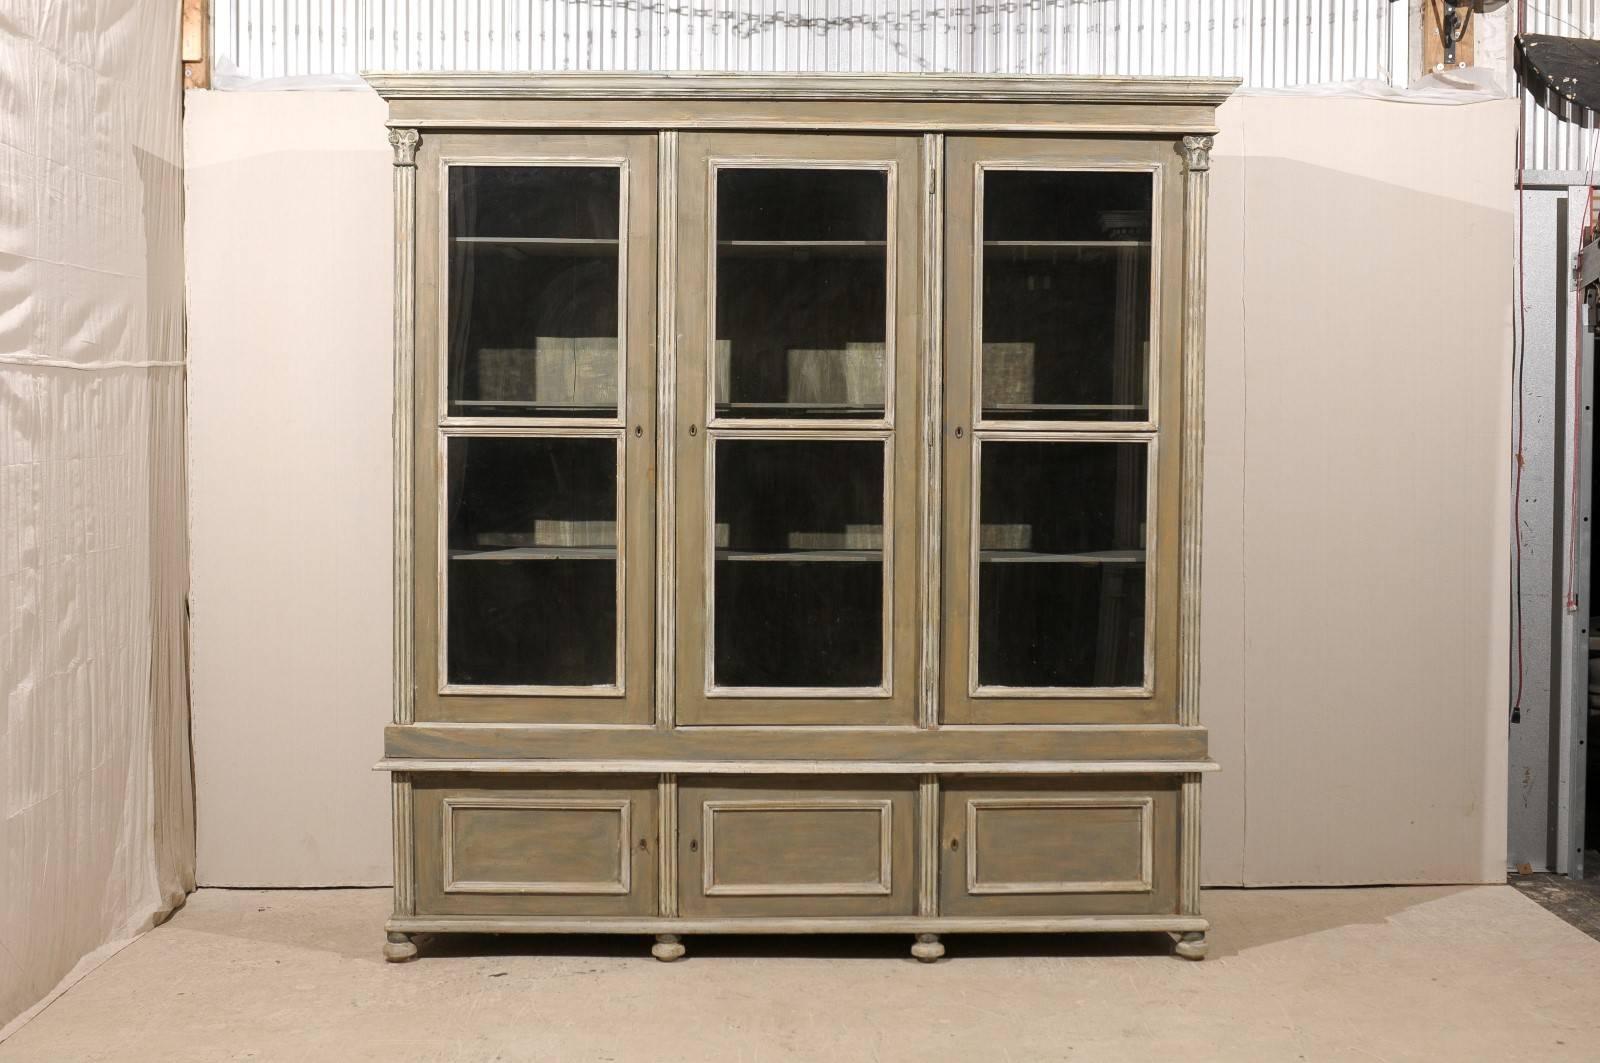 A 19th century French large glass door painted wood cabinet with three doors in the upper section and three smaller ones in the lower part. Flanked with thin columns. This French cabinet is raised on short round feet. The general color is of a green